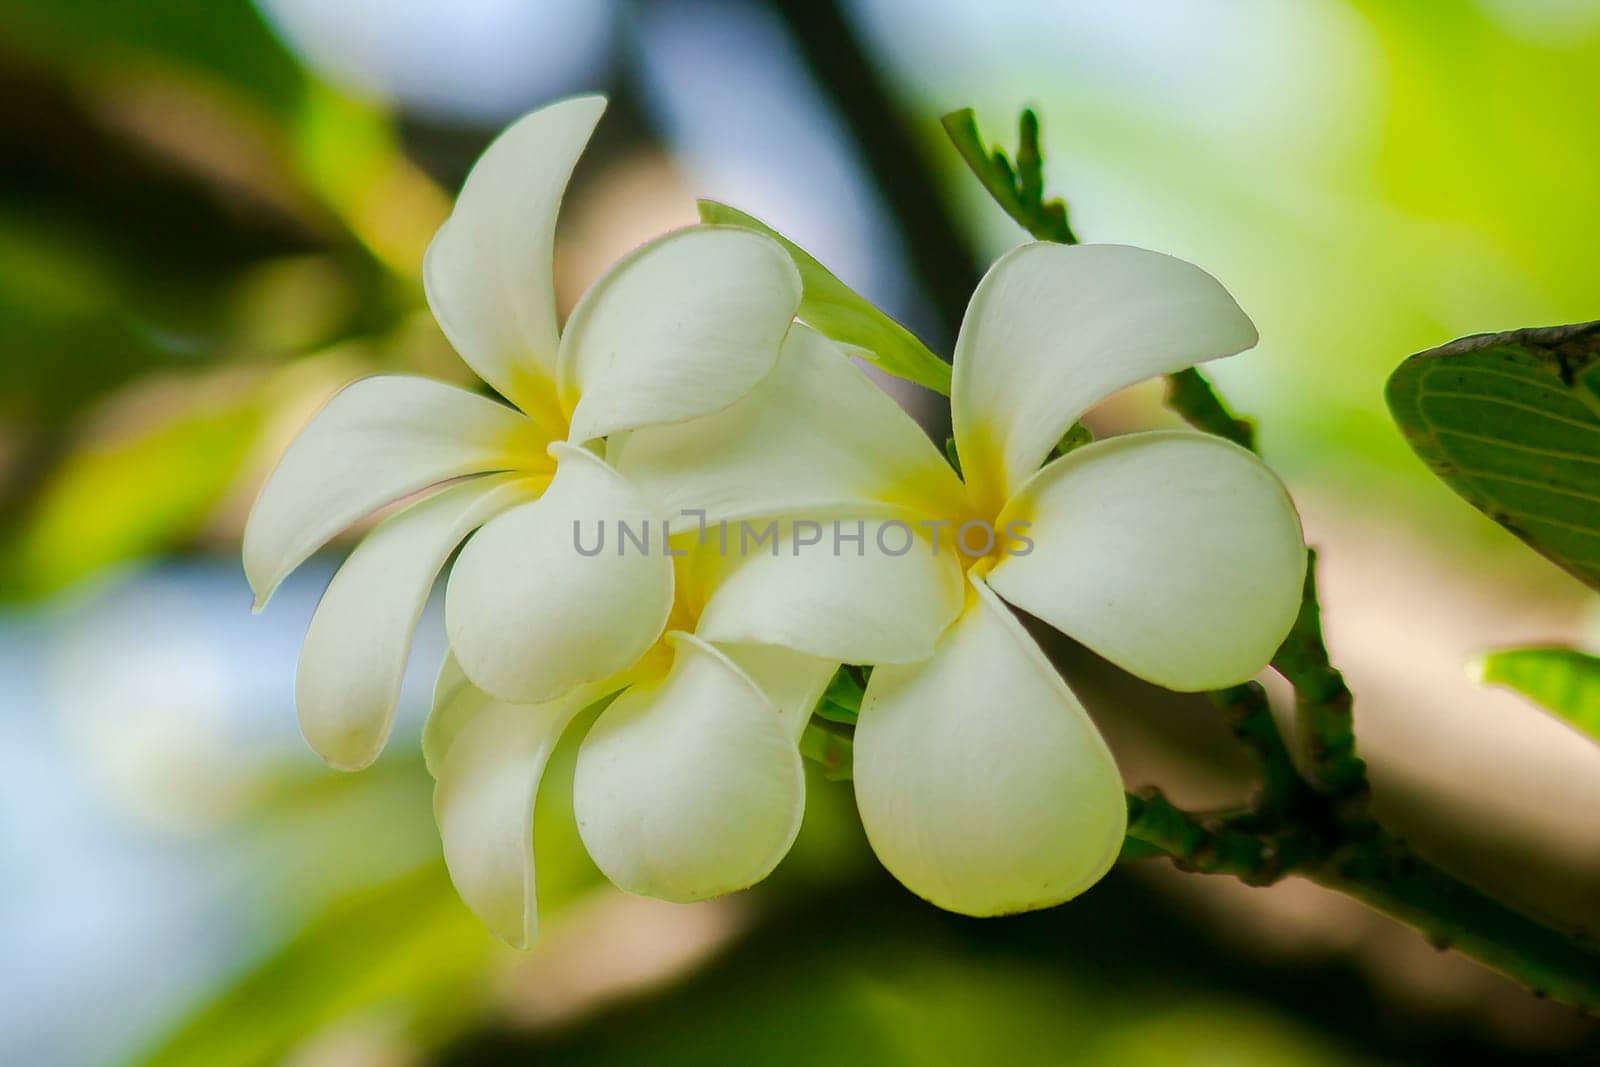 Plumeria white that is blooming Is an ornamental flower that is commonly grown in the garden.